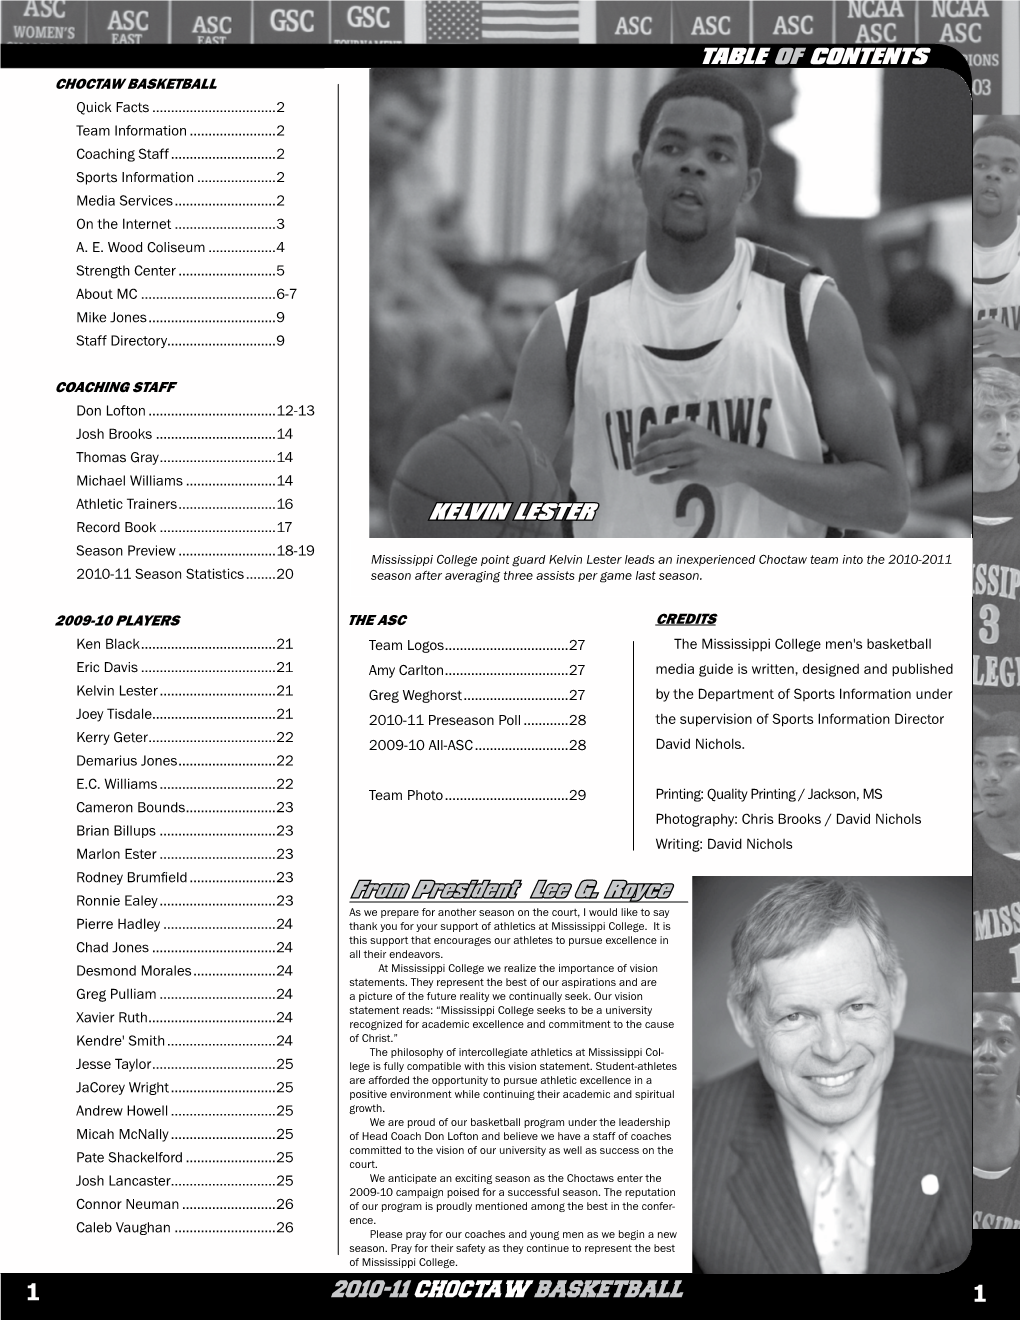 2010-11 Choctaw Basketball KELVIN LESTER Table of Contents